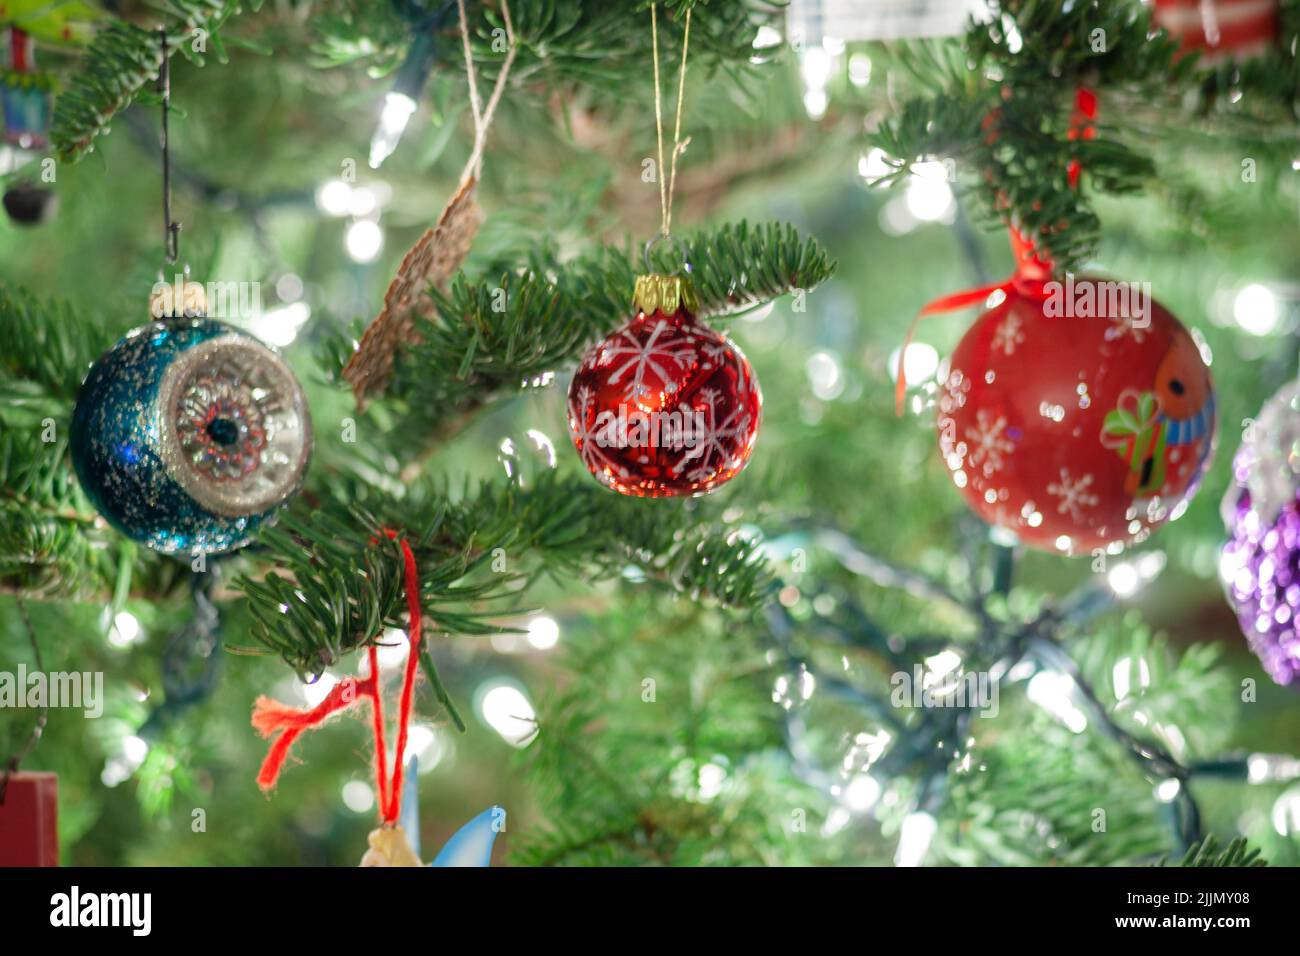 A closeup of setting up the Christmas tree with red and blue ornaments and lights Stock Photo